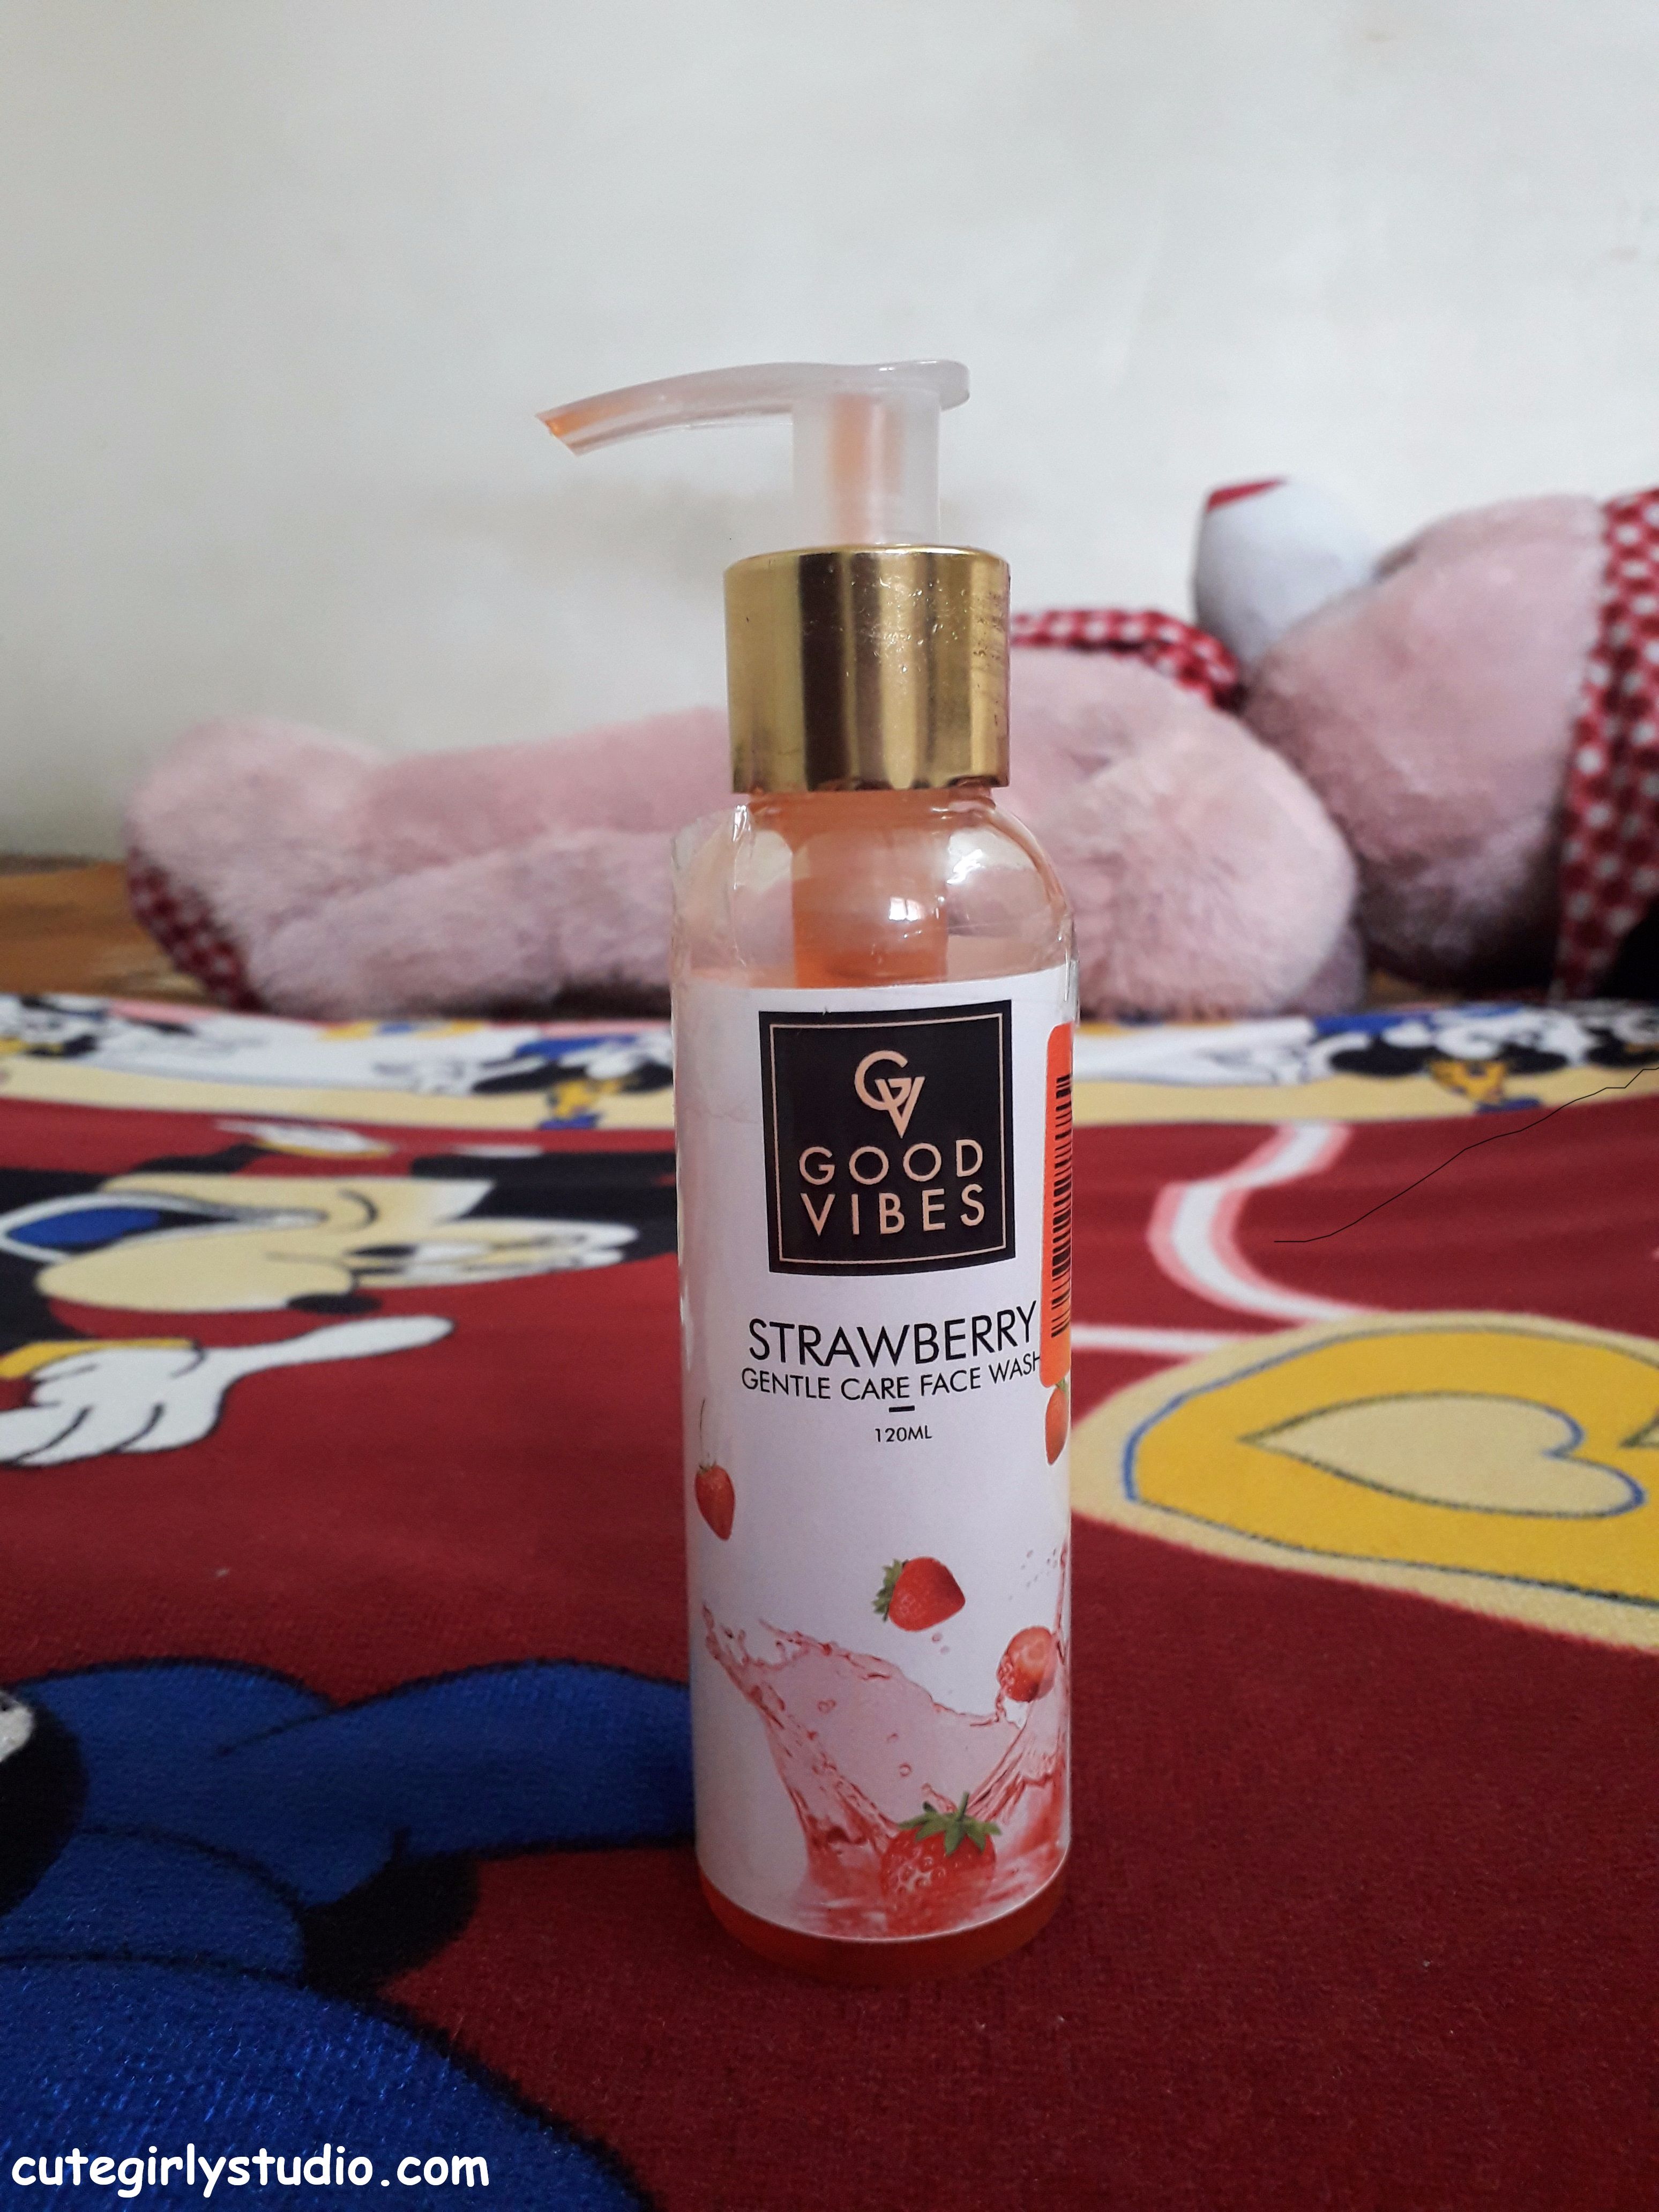 Good vibes strawberry face wash